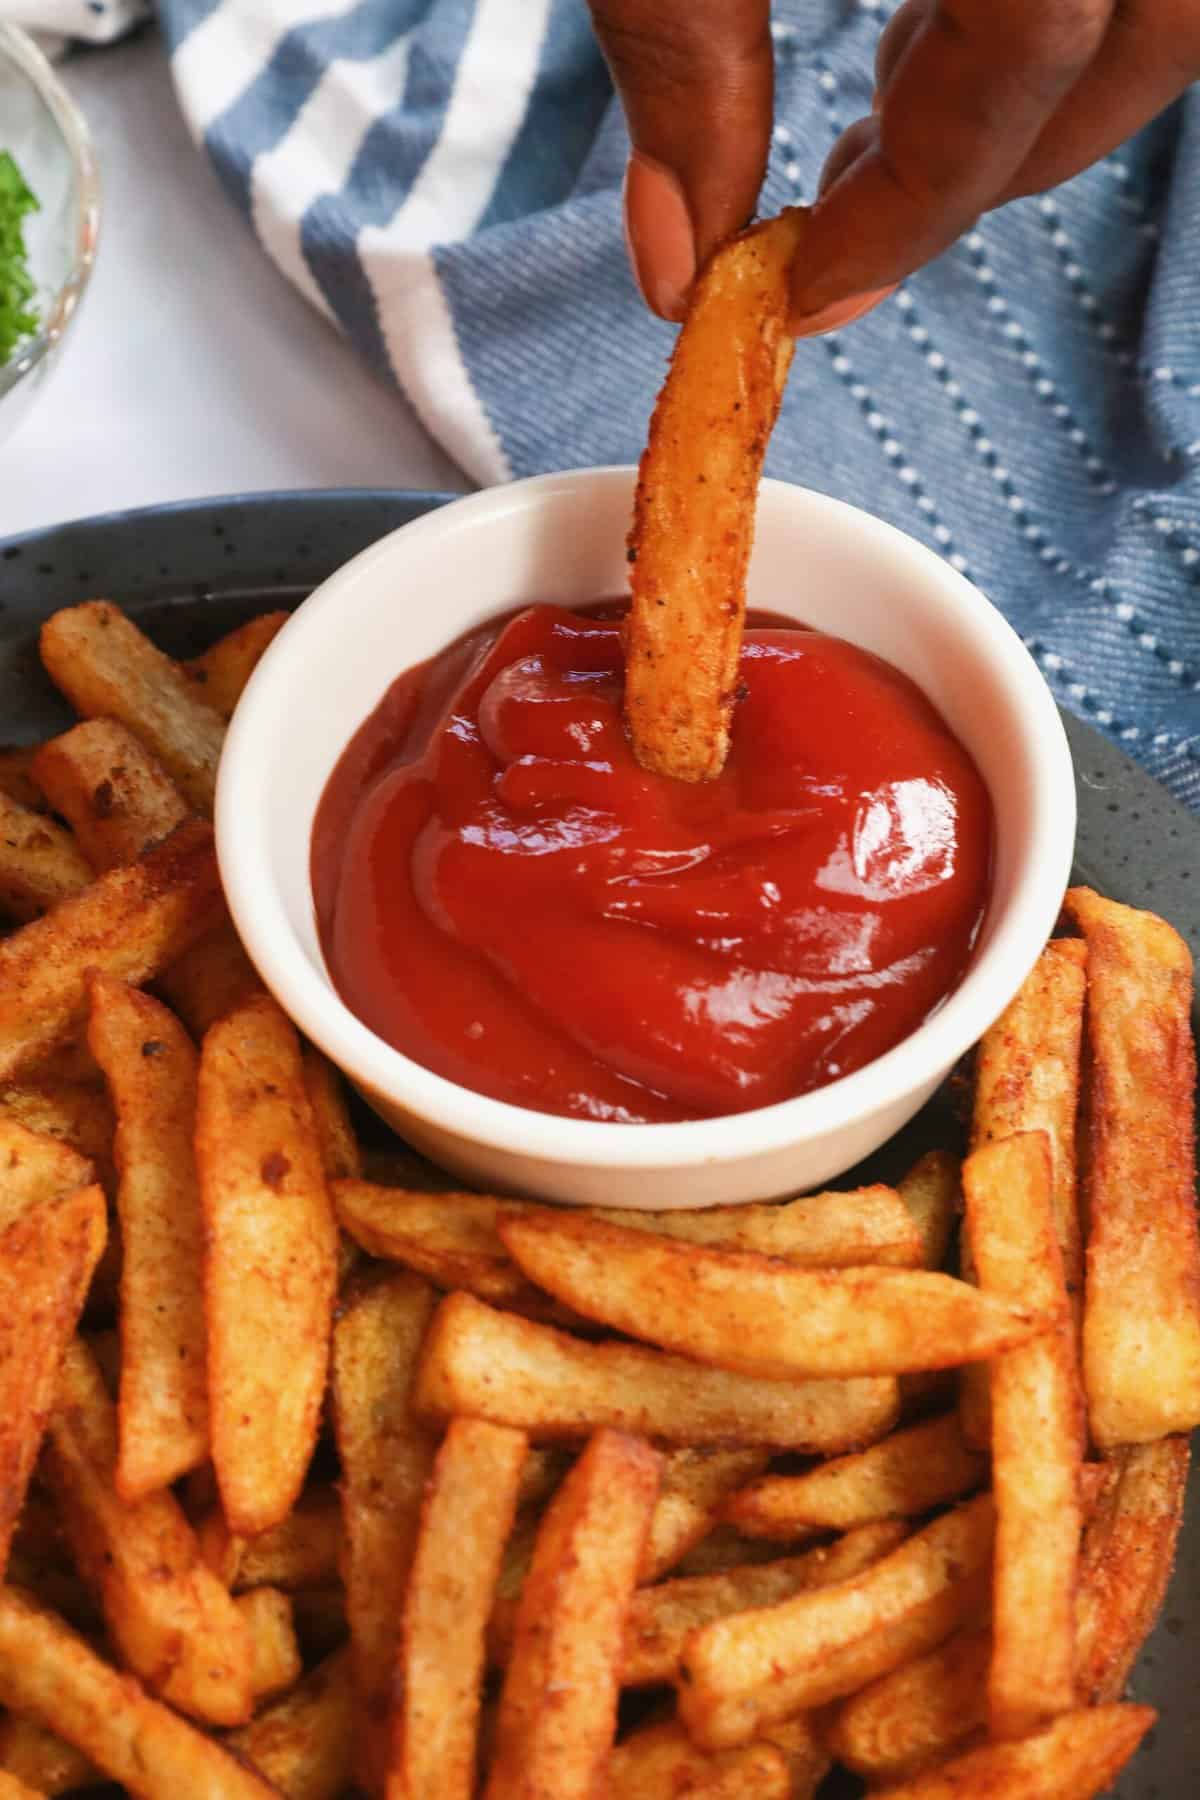 Dipping a crispy Cajun fry in ketchup for a great snack